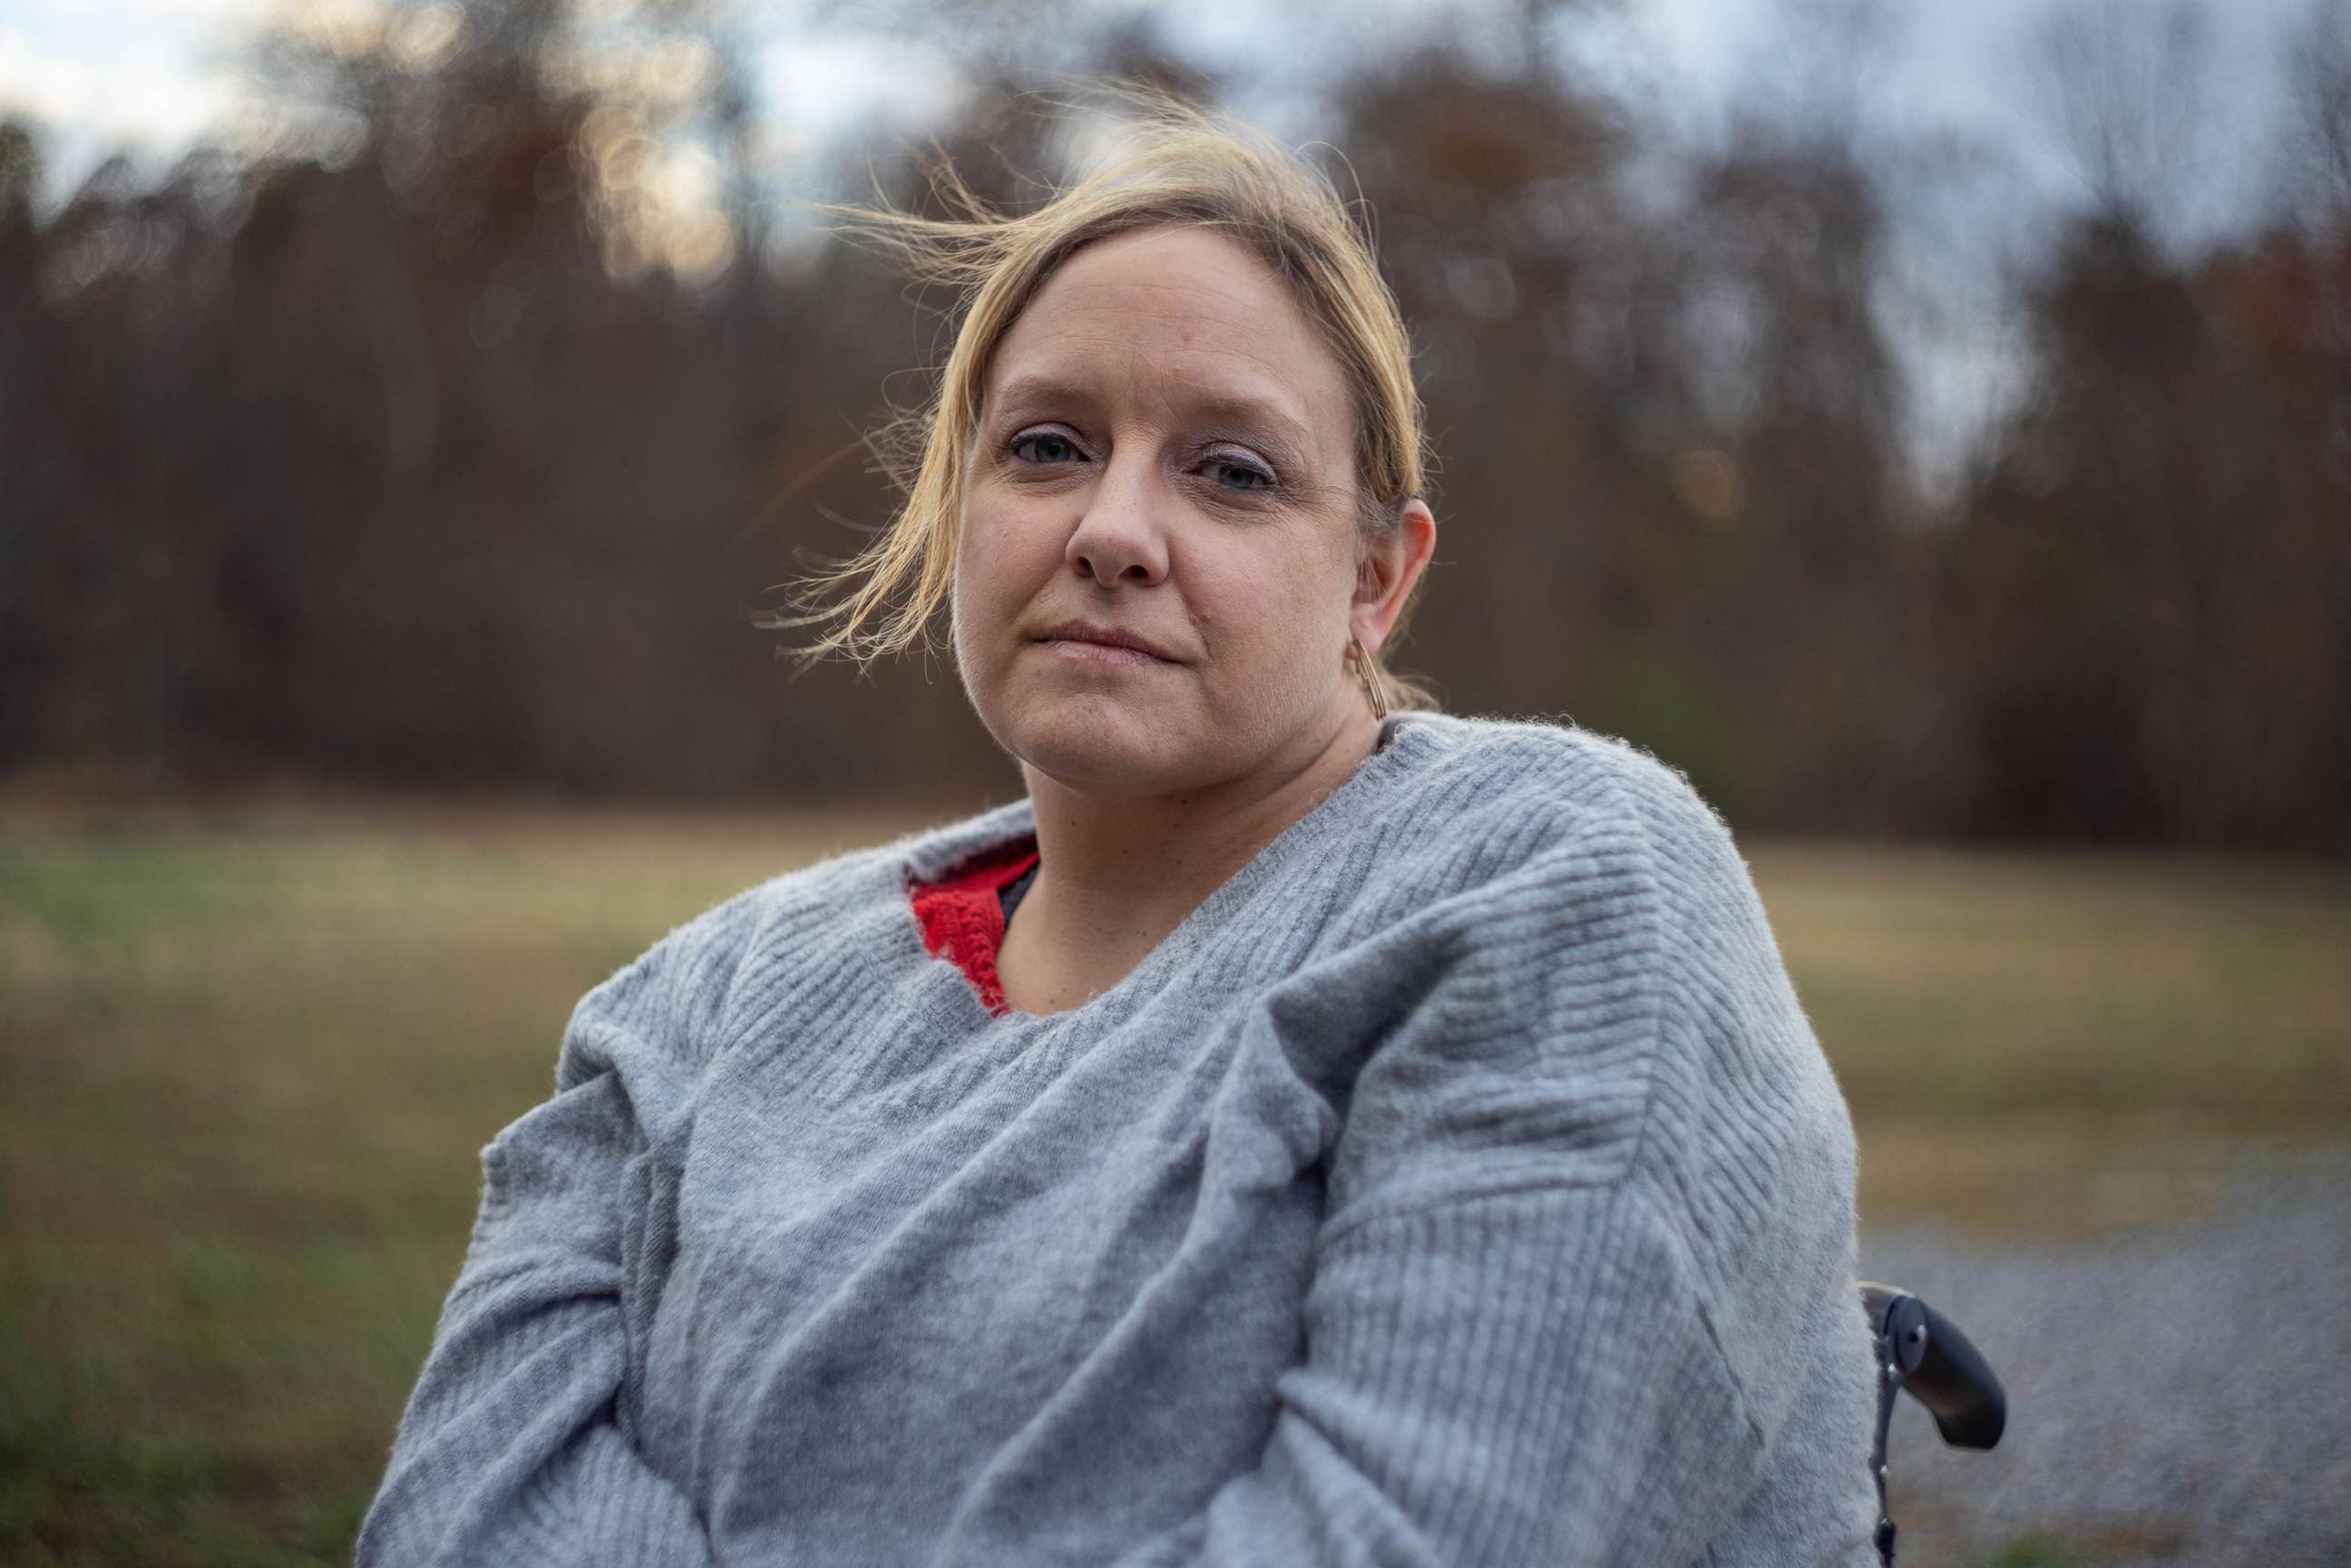 PHOTO: Missy Jenkins Smith is a survivor of 1997 shooting at Heath High School in Paducah, Kentucky.